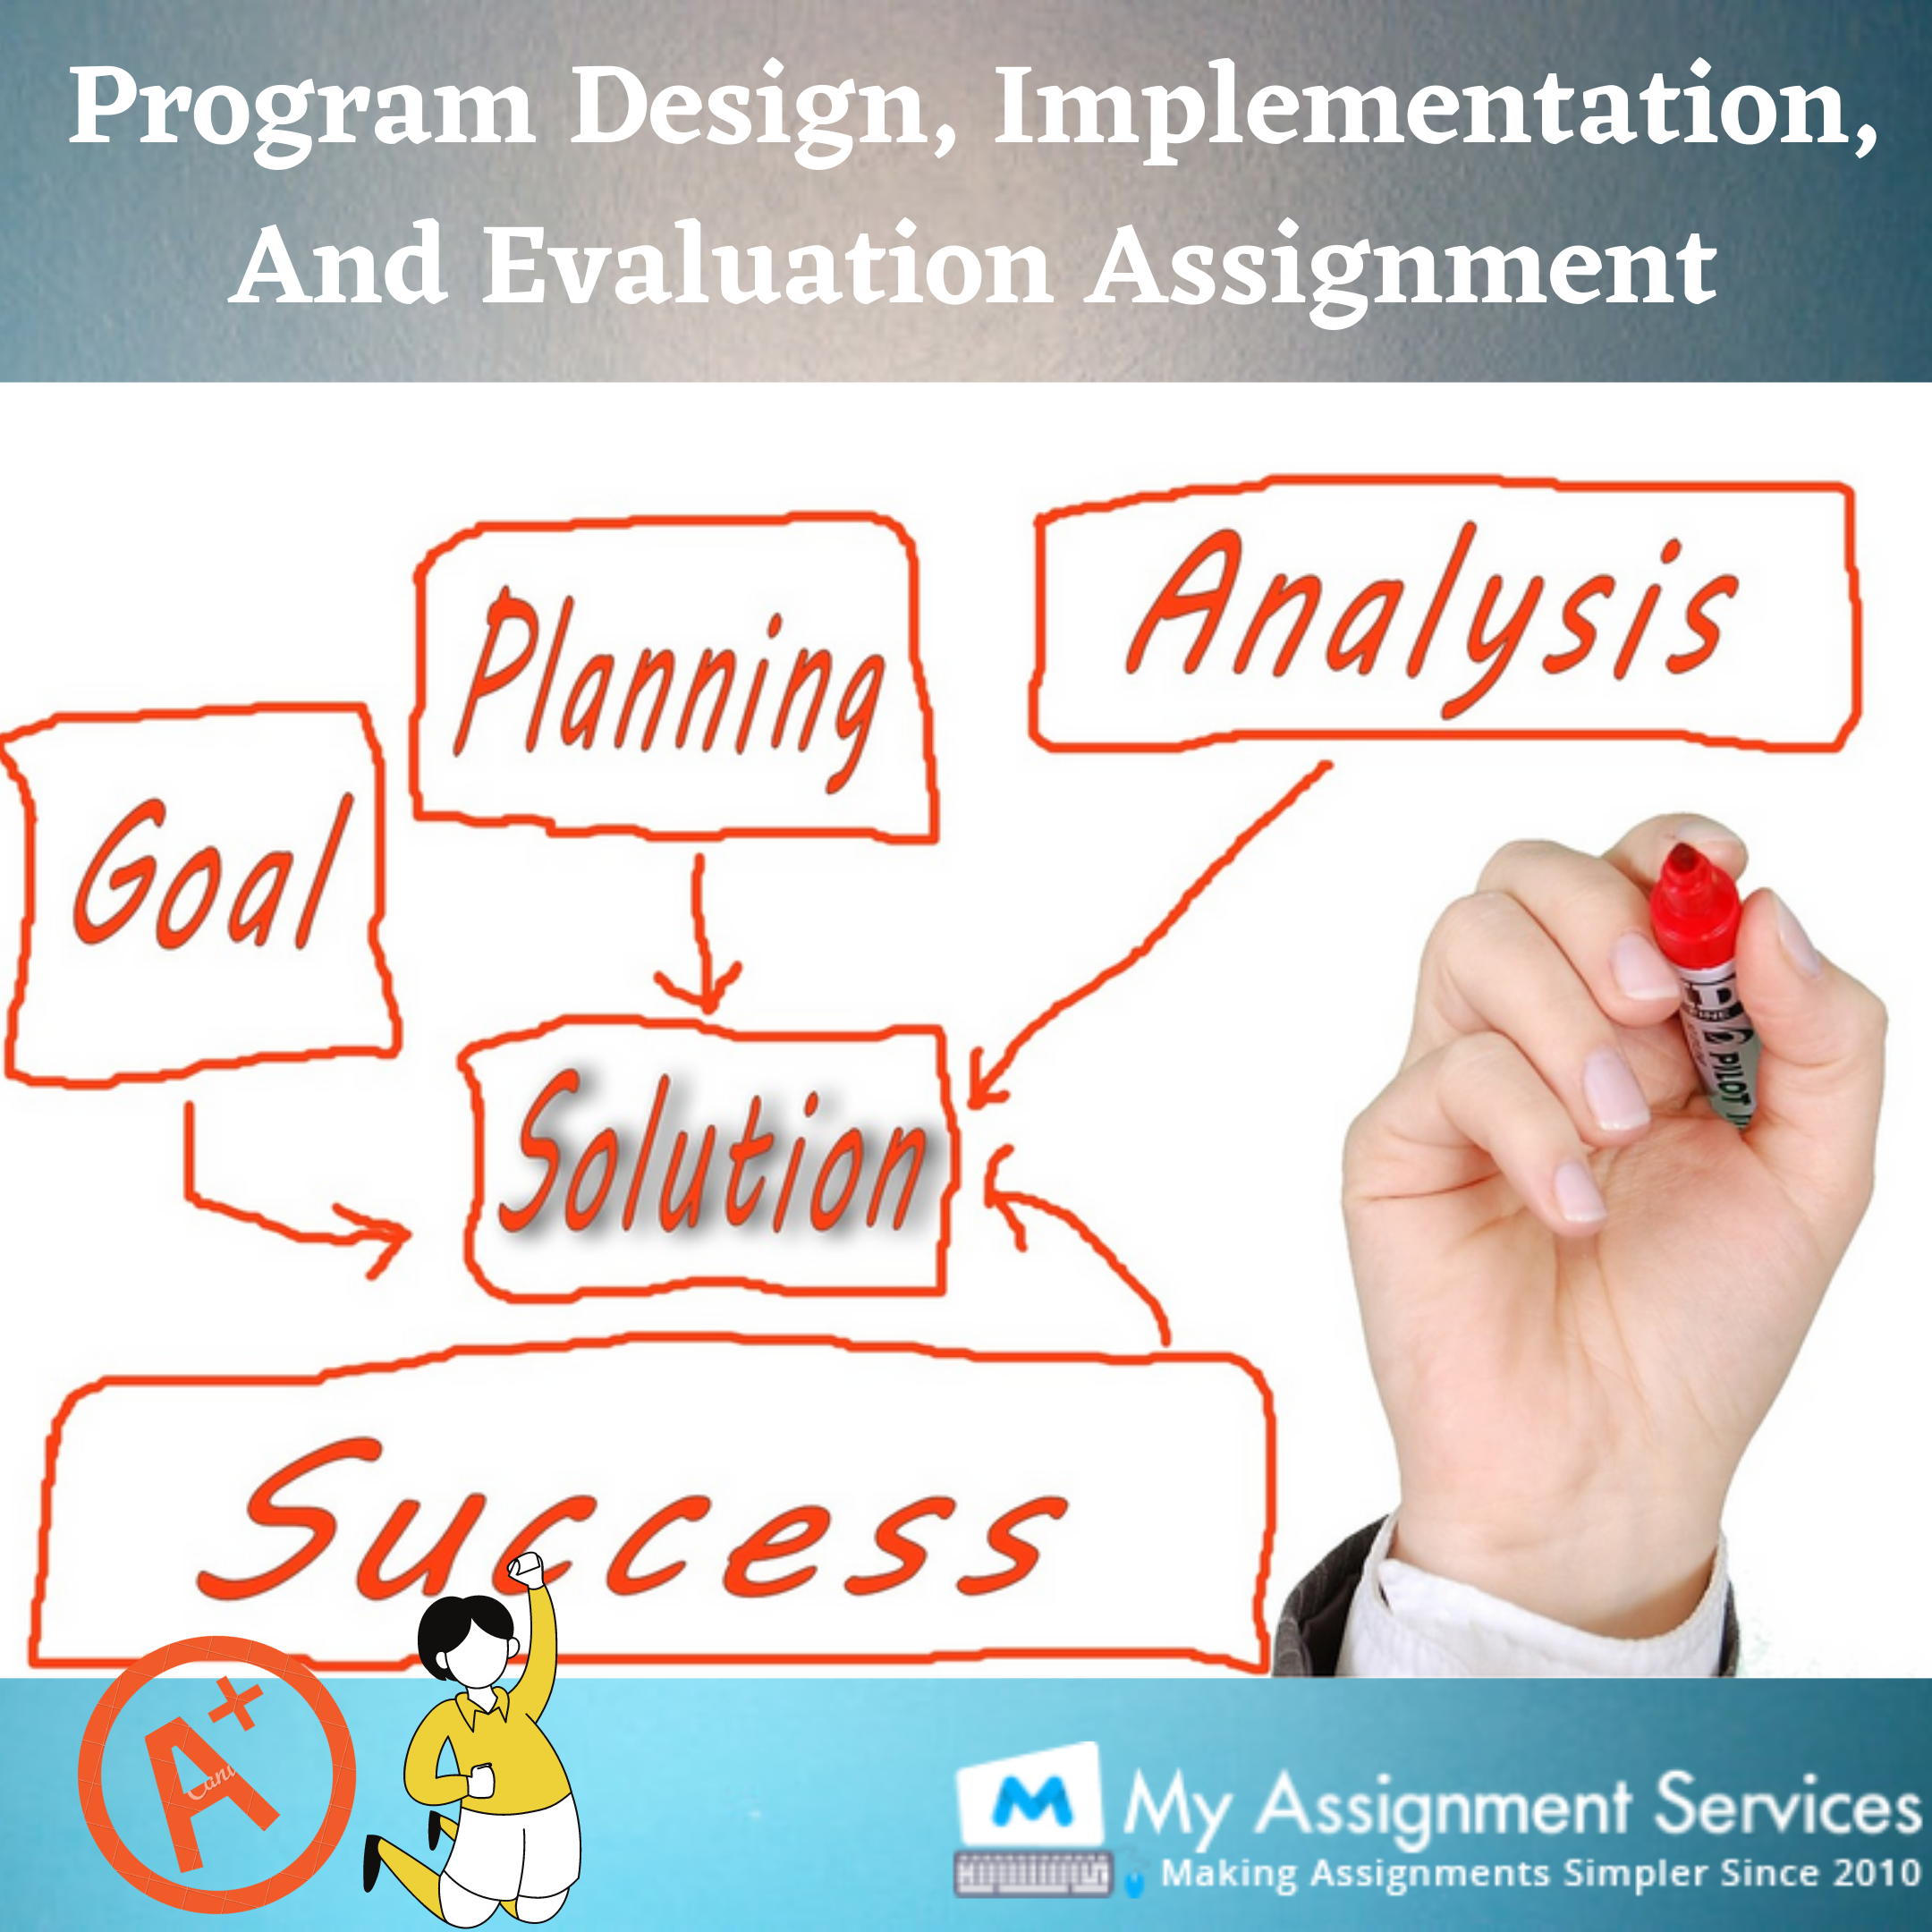 Program design, implementation, and evaluation assignment help experts